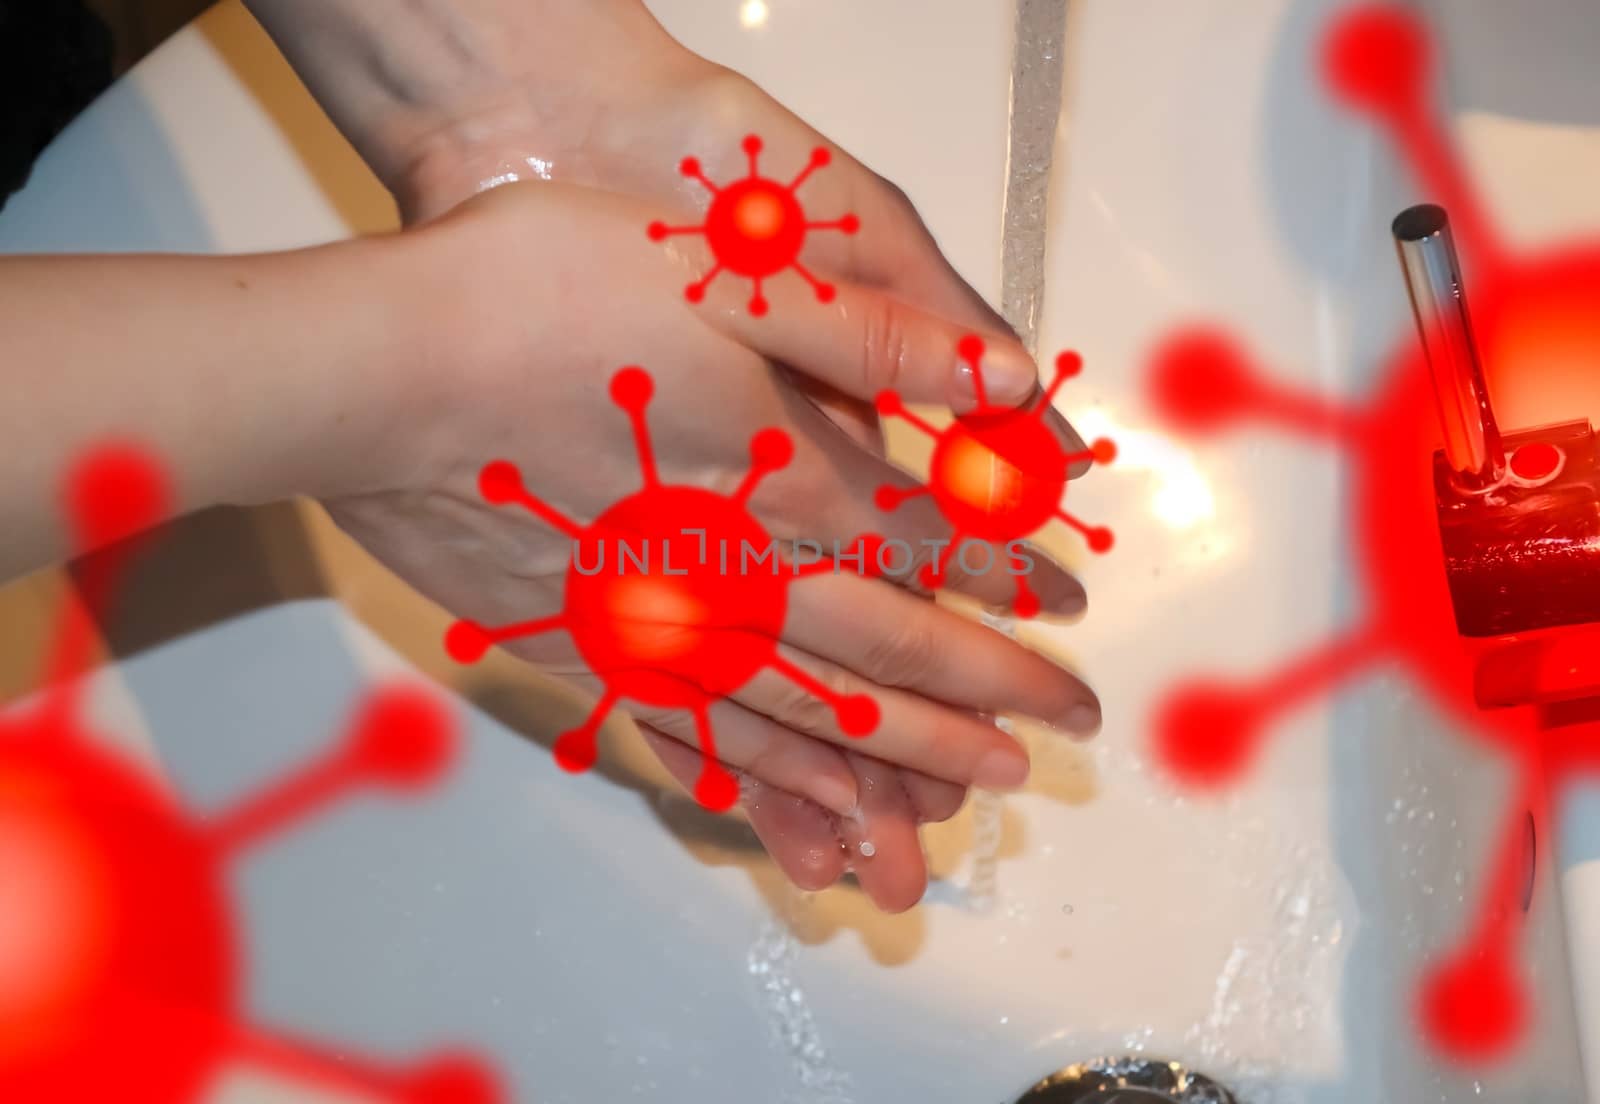 Cleaning and washing hands with soap prevention for outbreak of coronavirus 2019-ncov by MP_foto71